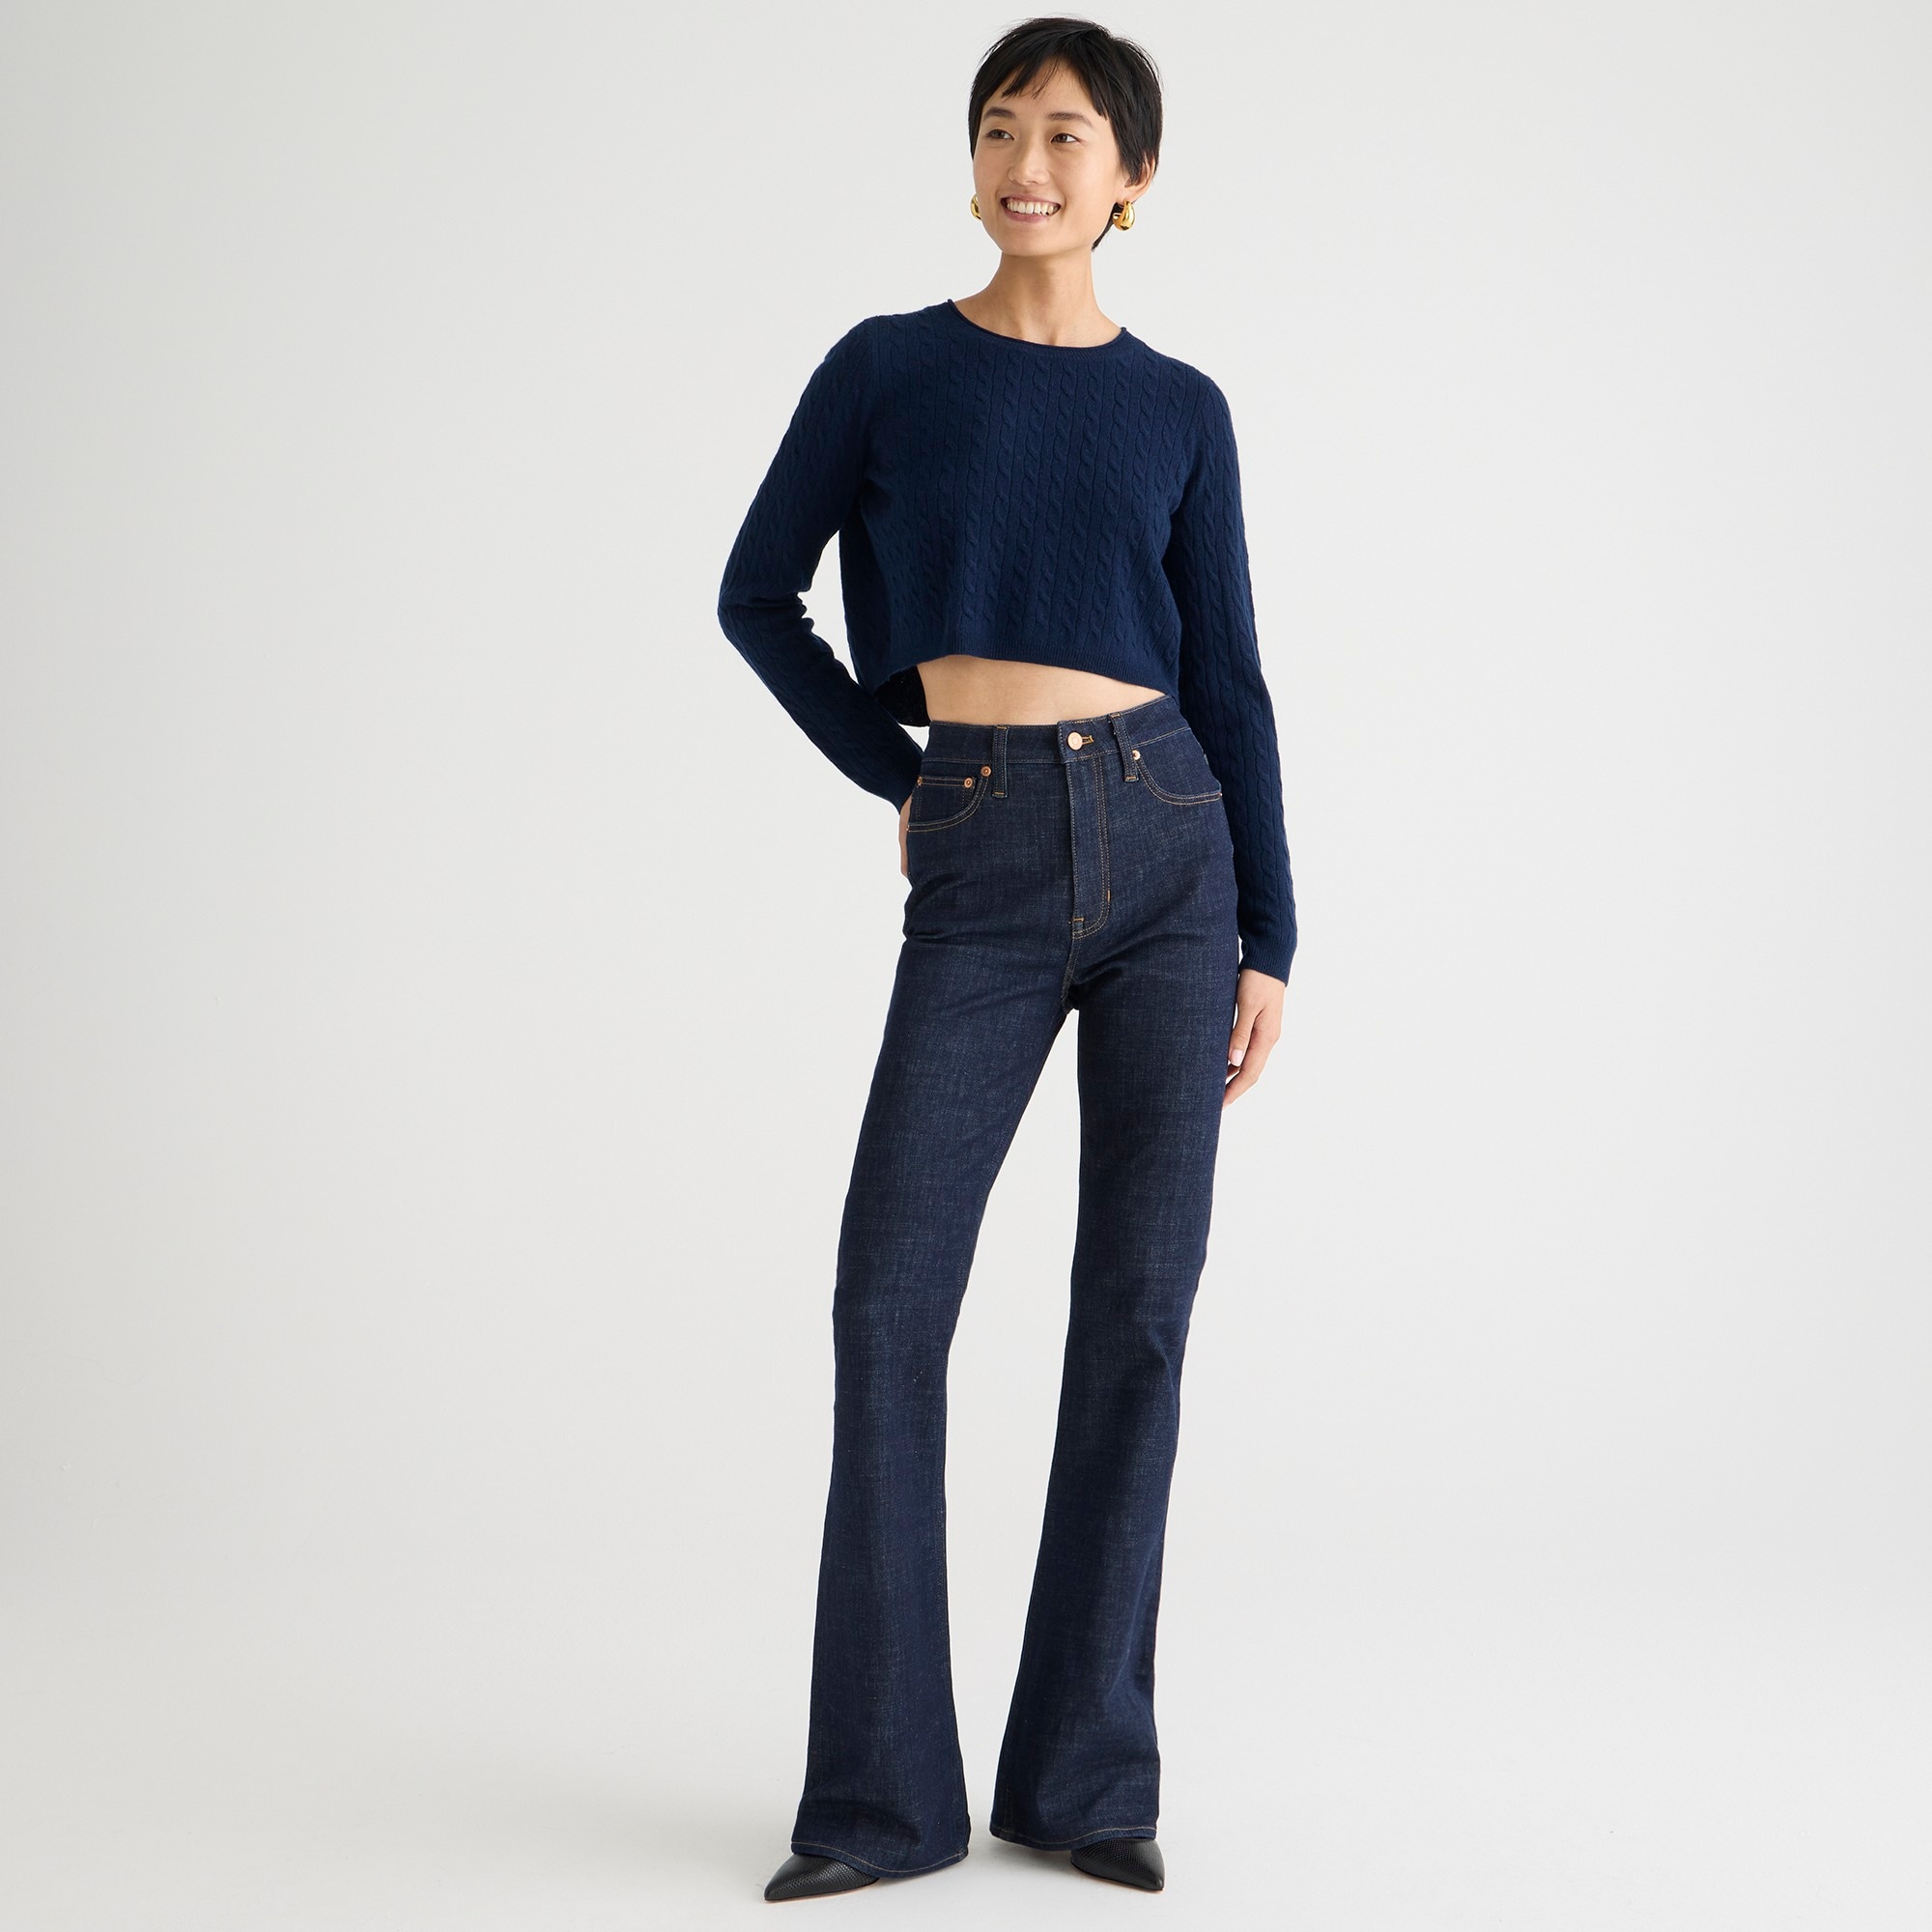  Tall skinny flare jean in Rinse wash